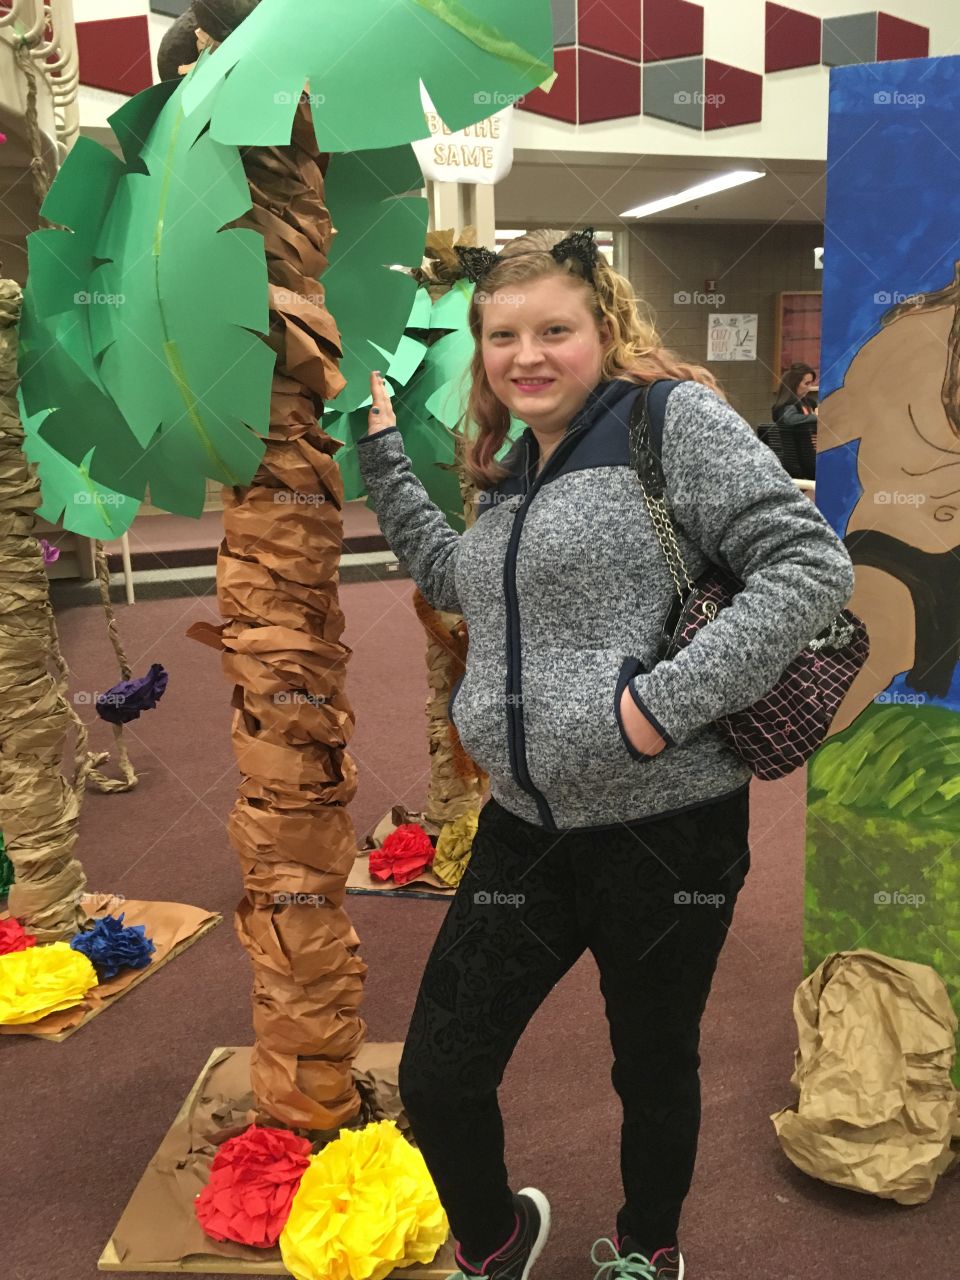 She poses by a paper palm tree for the Tarzan musical at a high school.